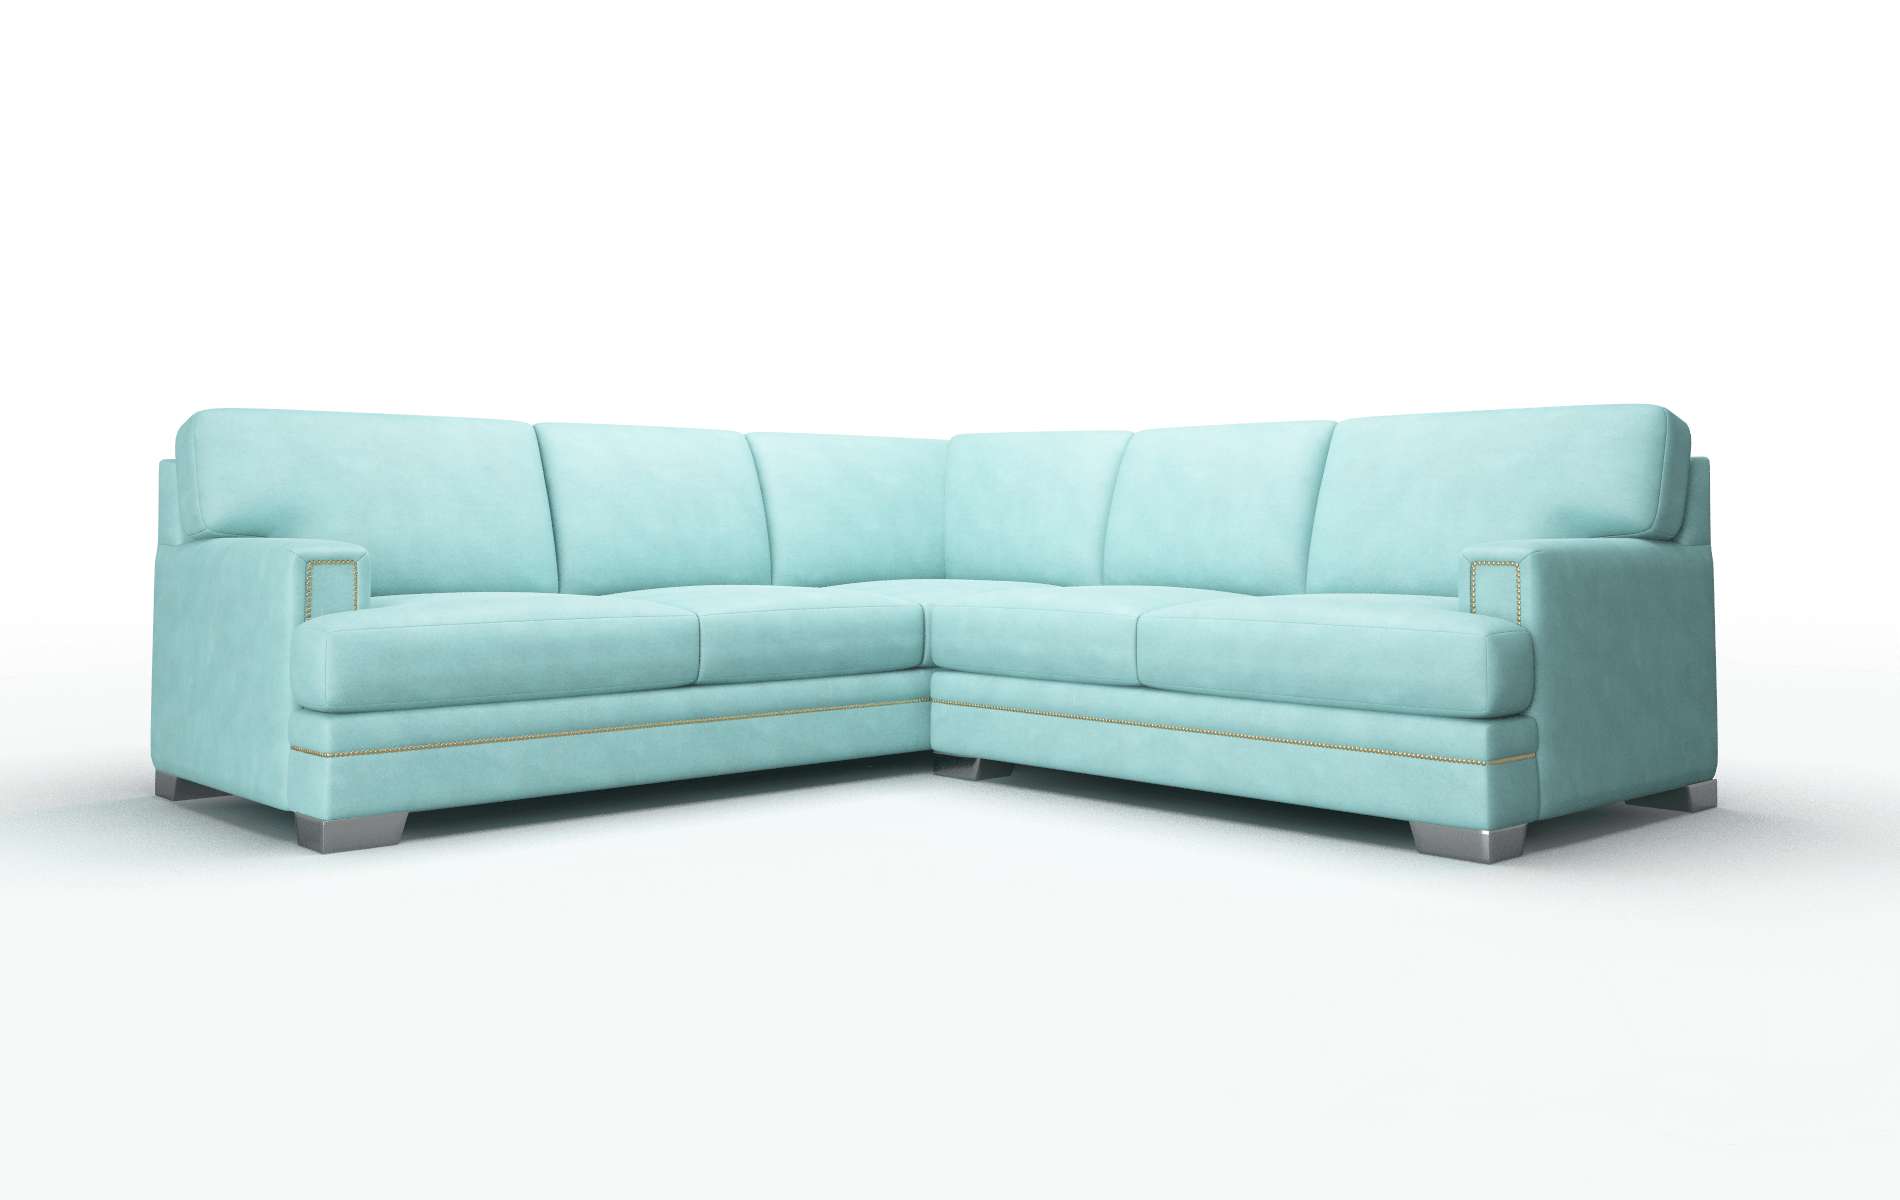 Barcelona Curious Turquoise Sectional metal legs 1